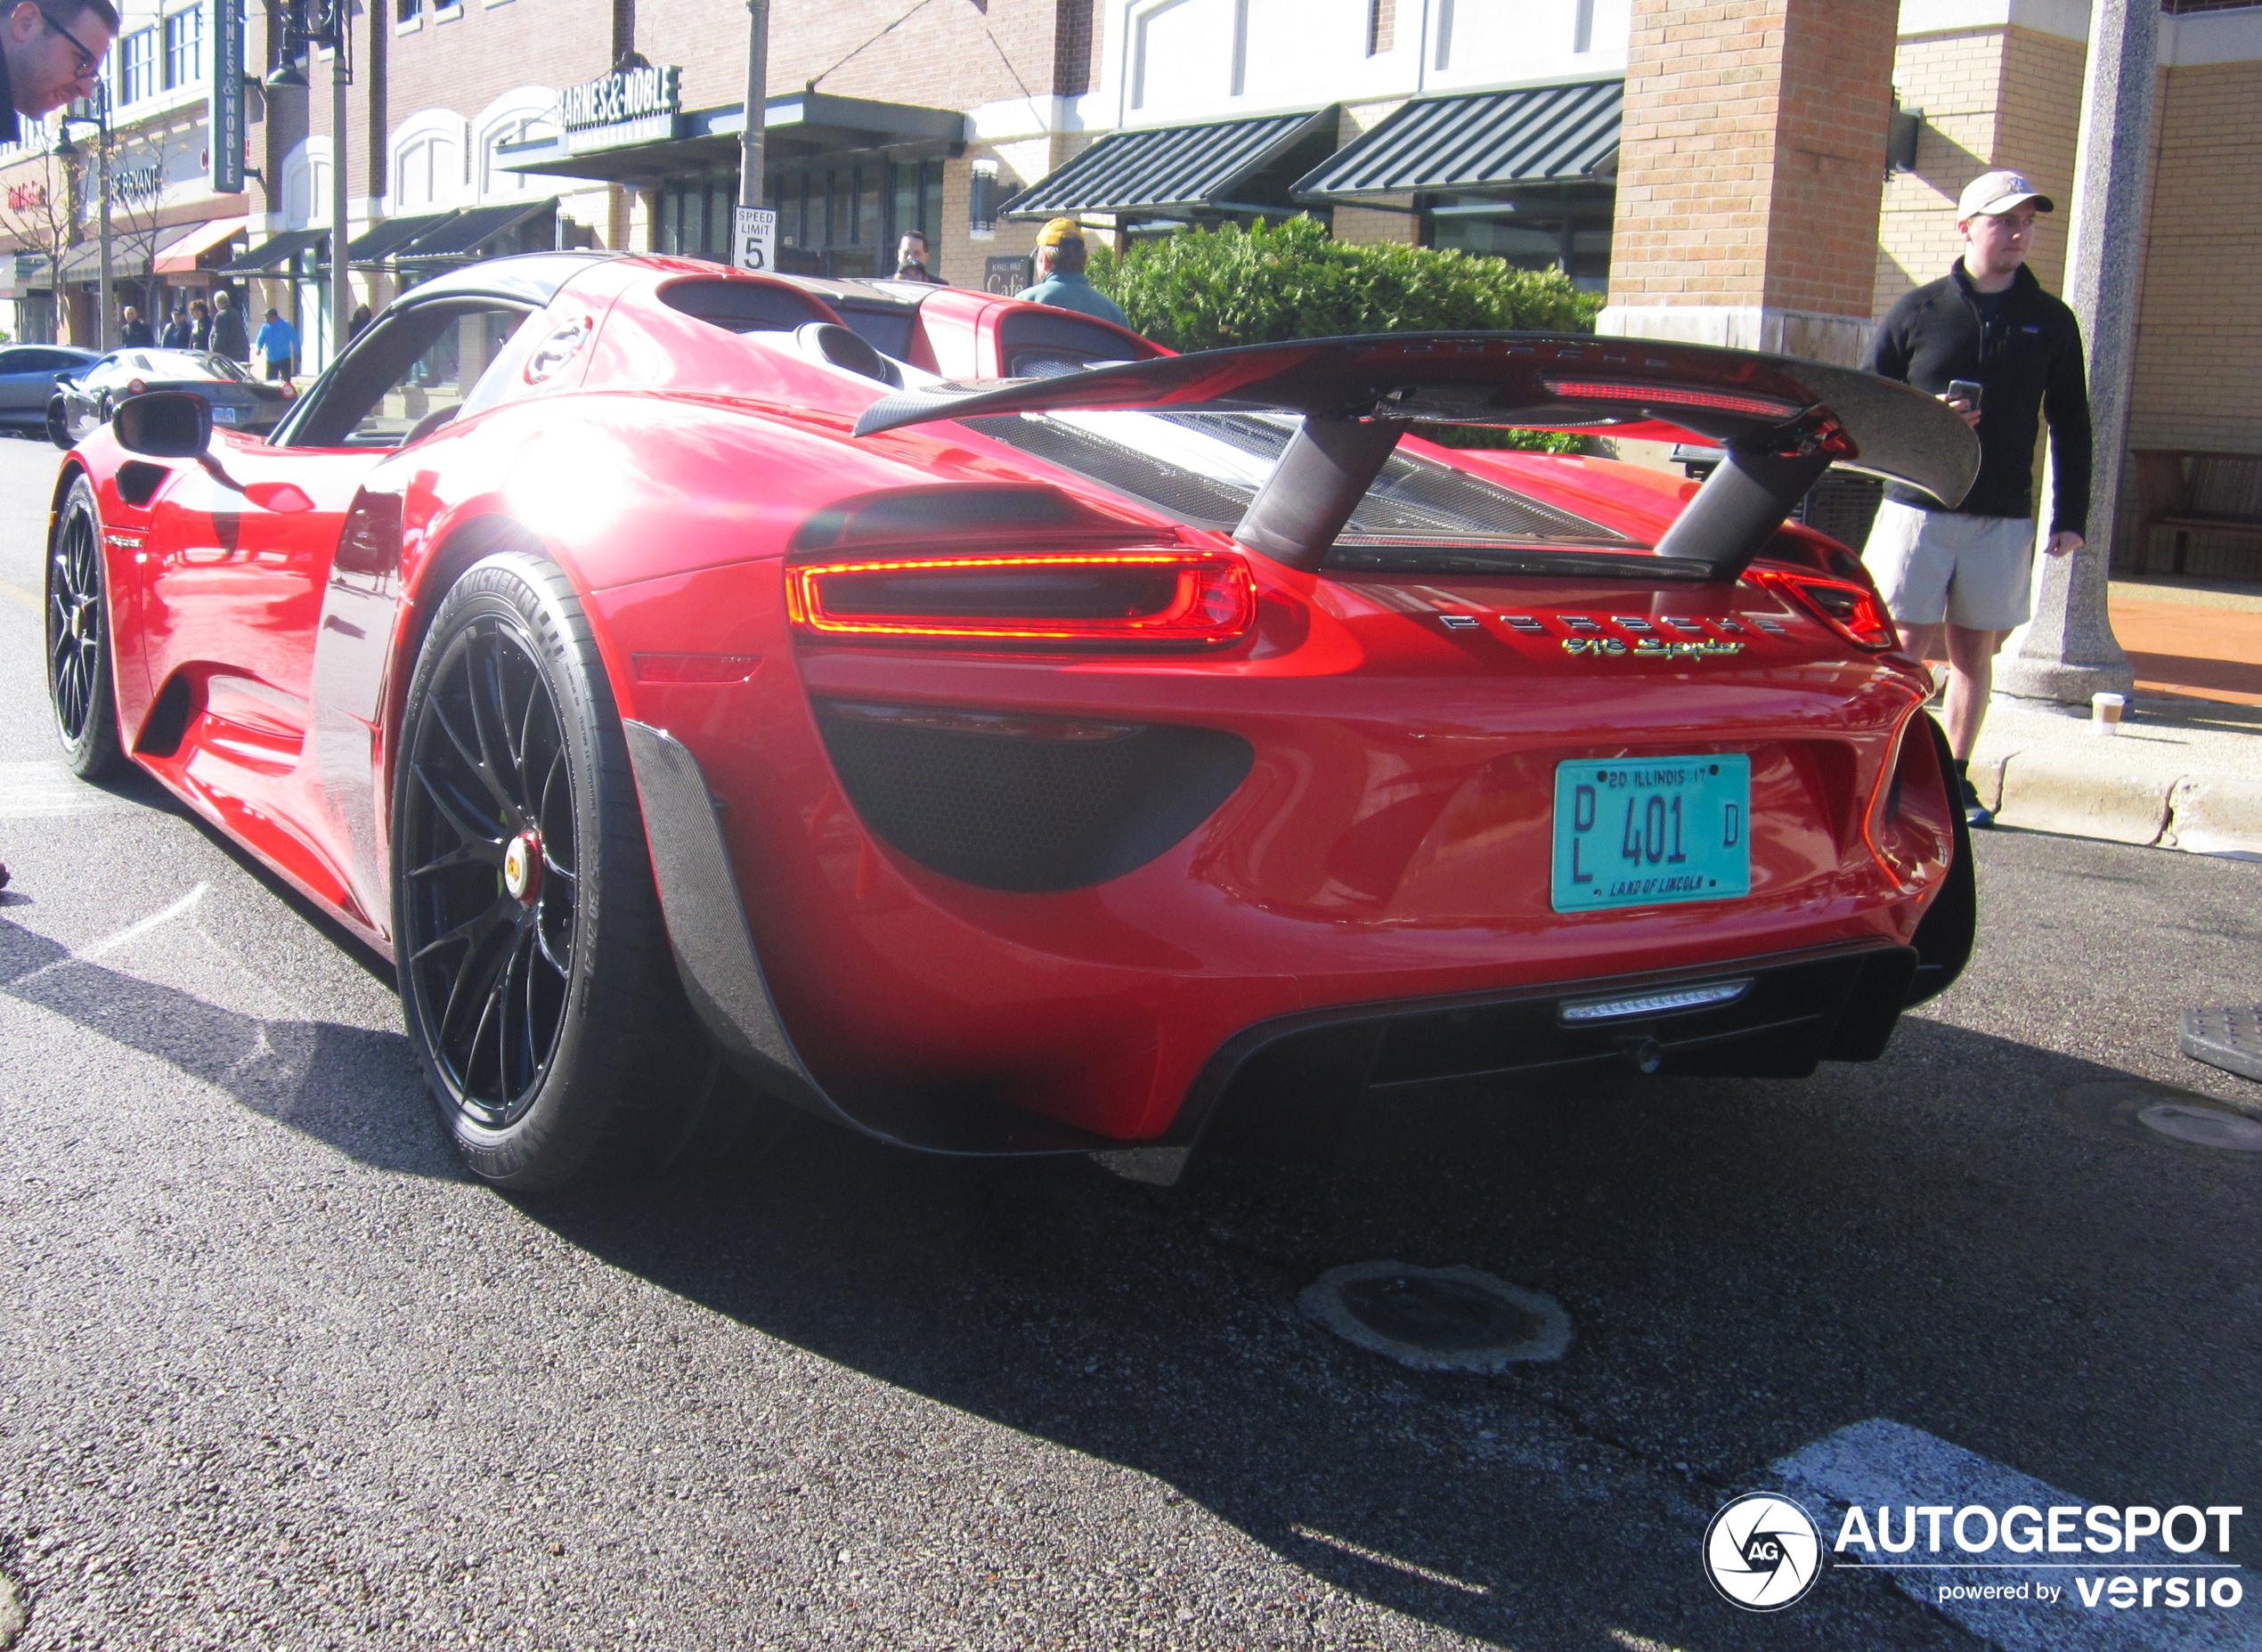 Another red 918 Spyder spotted in the USA.